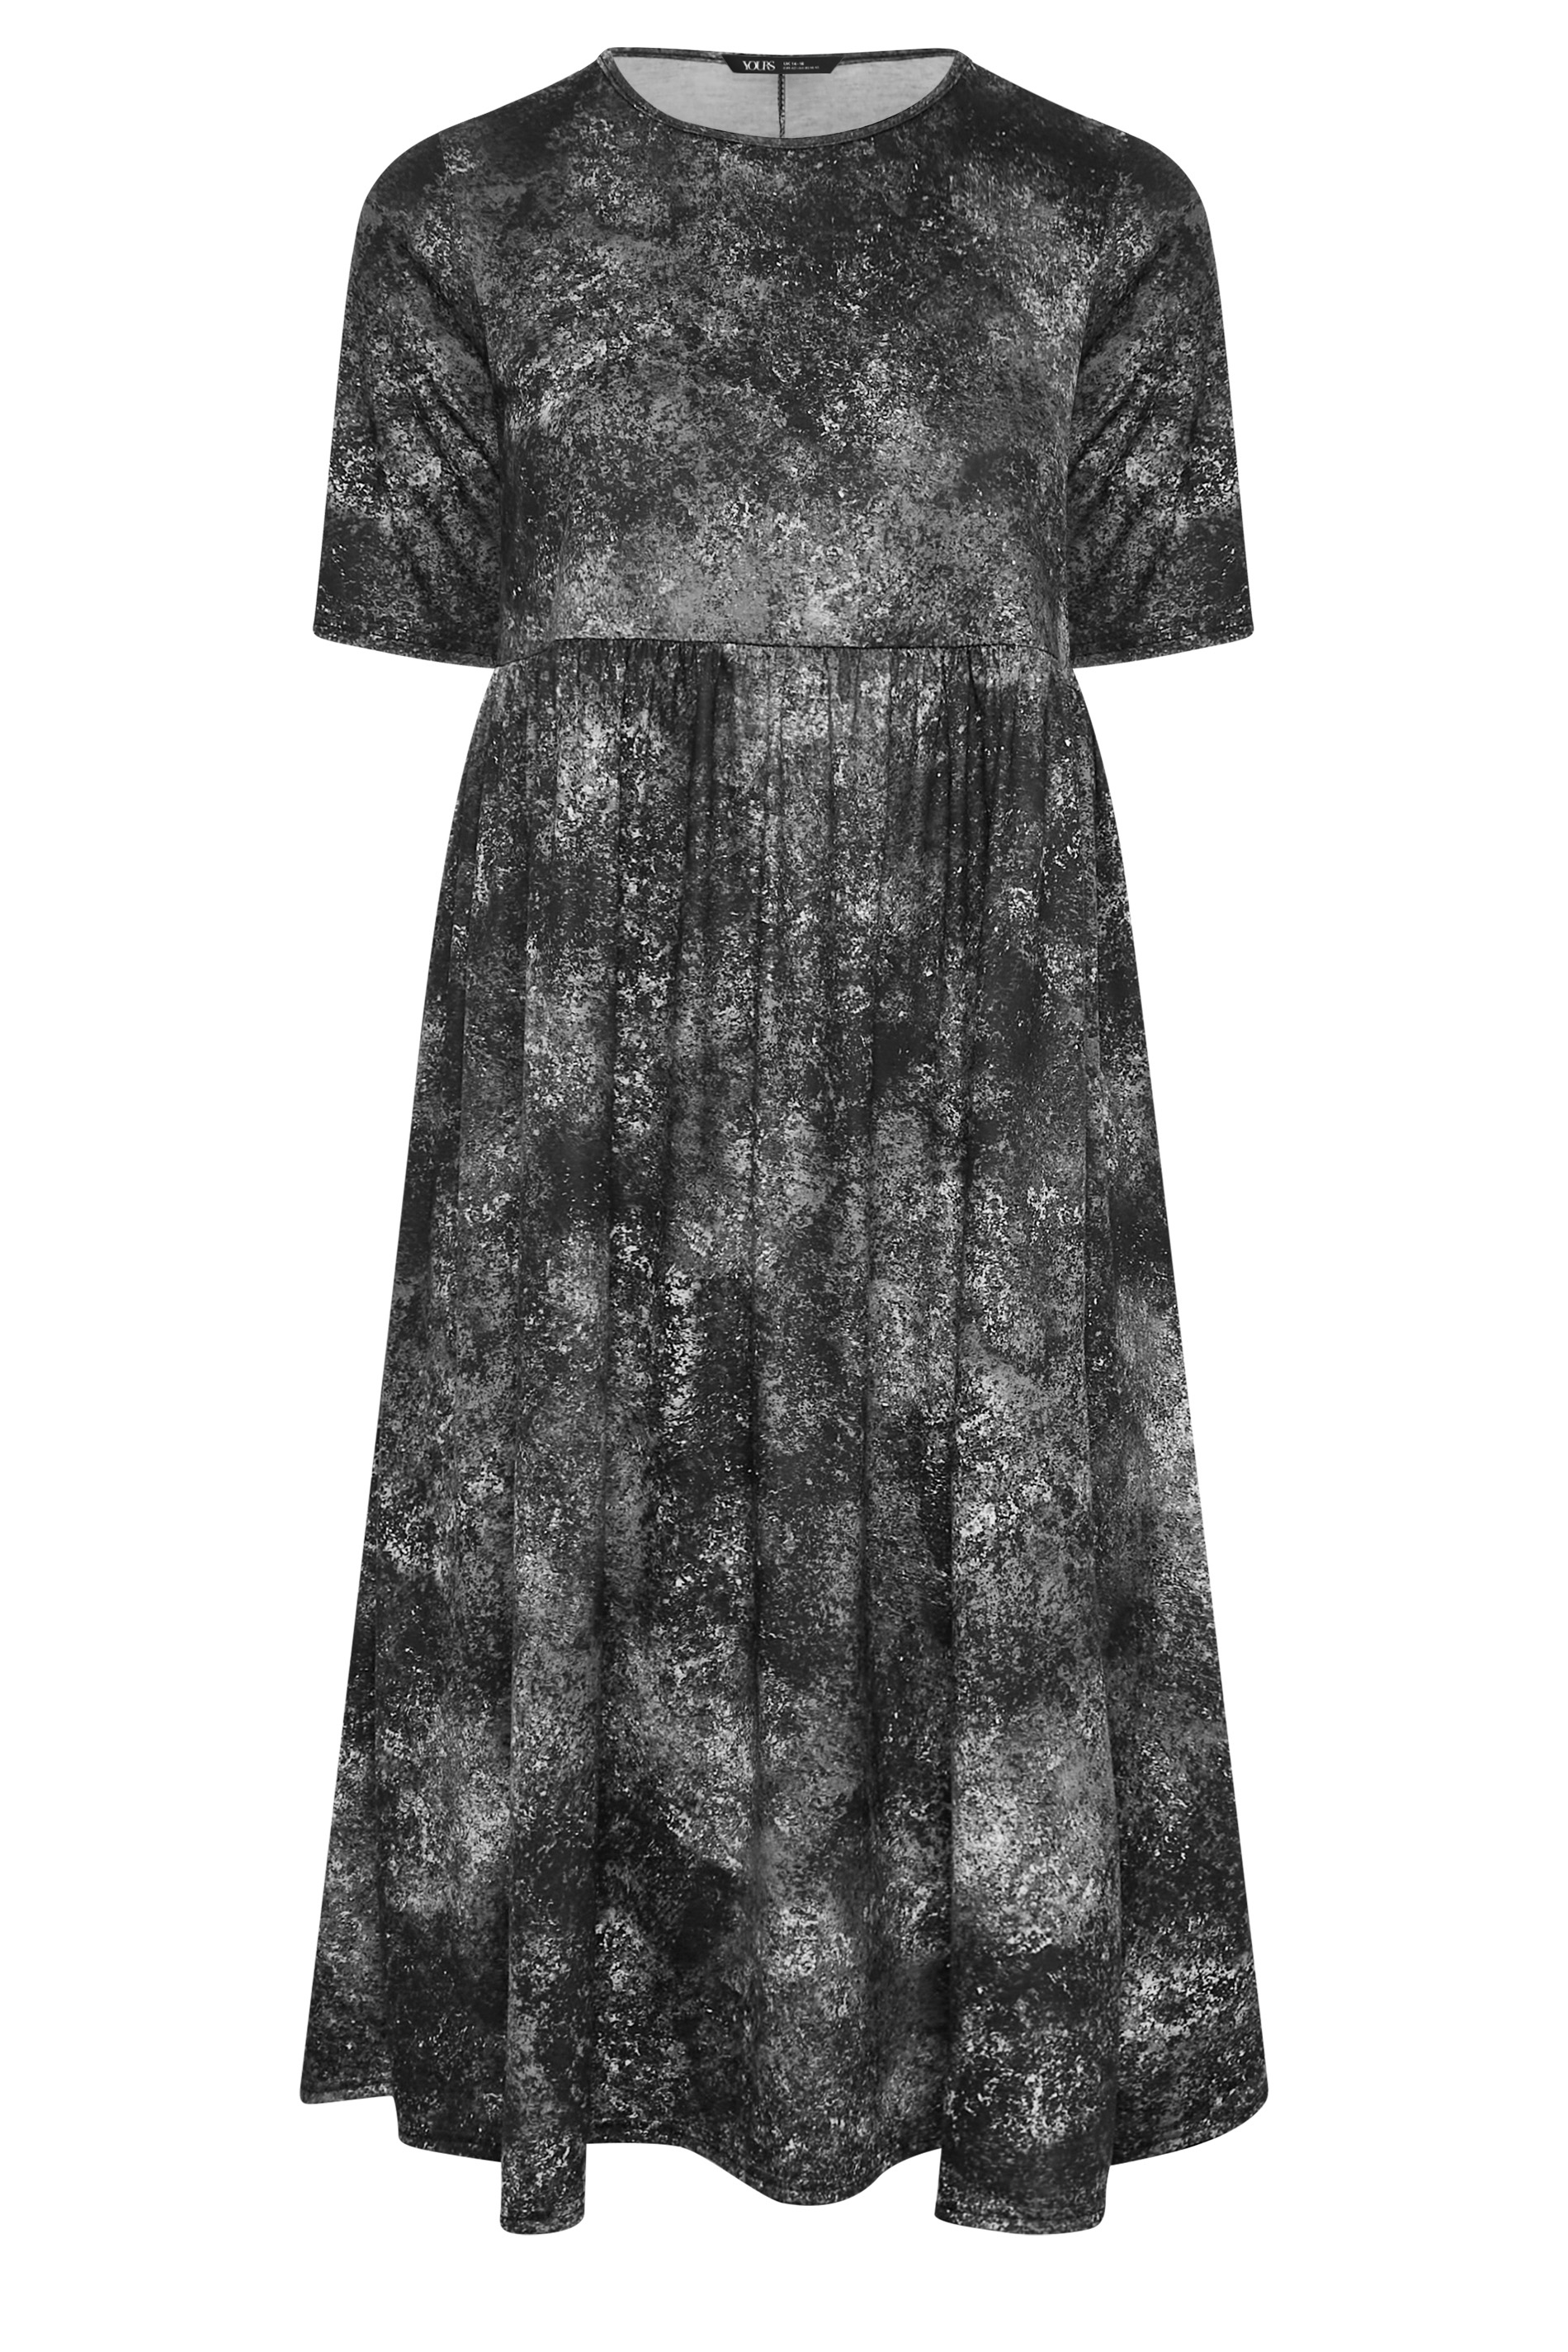 LIMITED COLLECTION Plus Size Black Acid Wash Smock Midaxi Dress | Yours ...